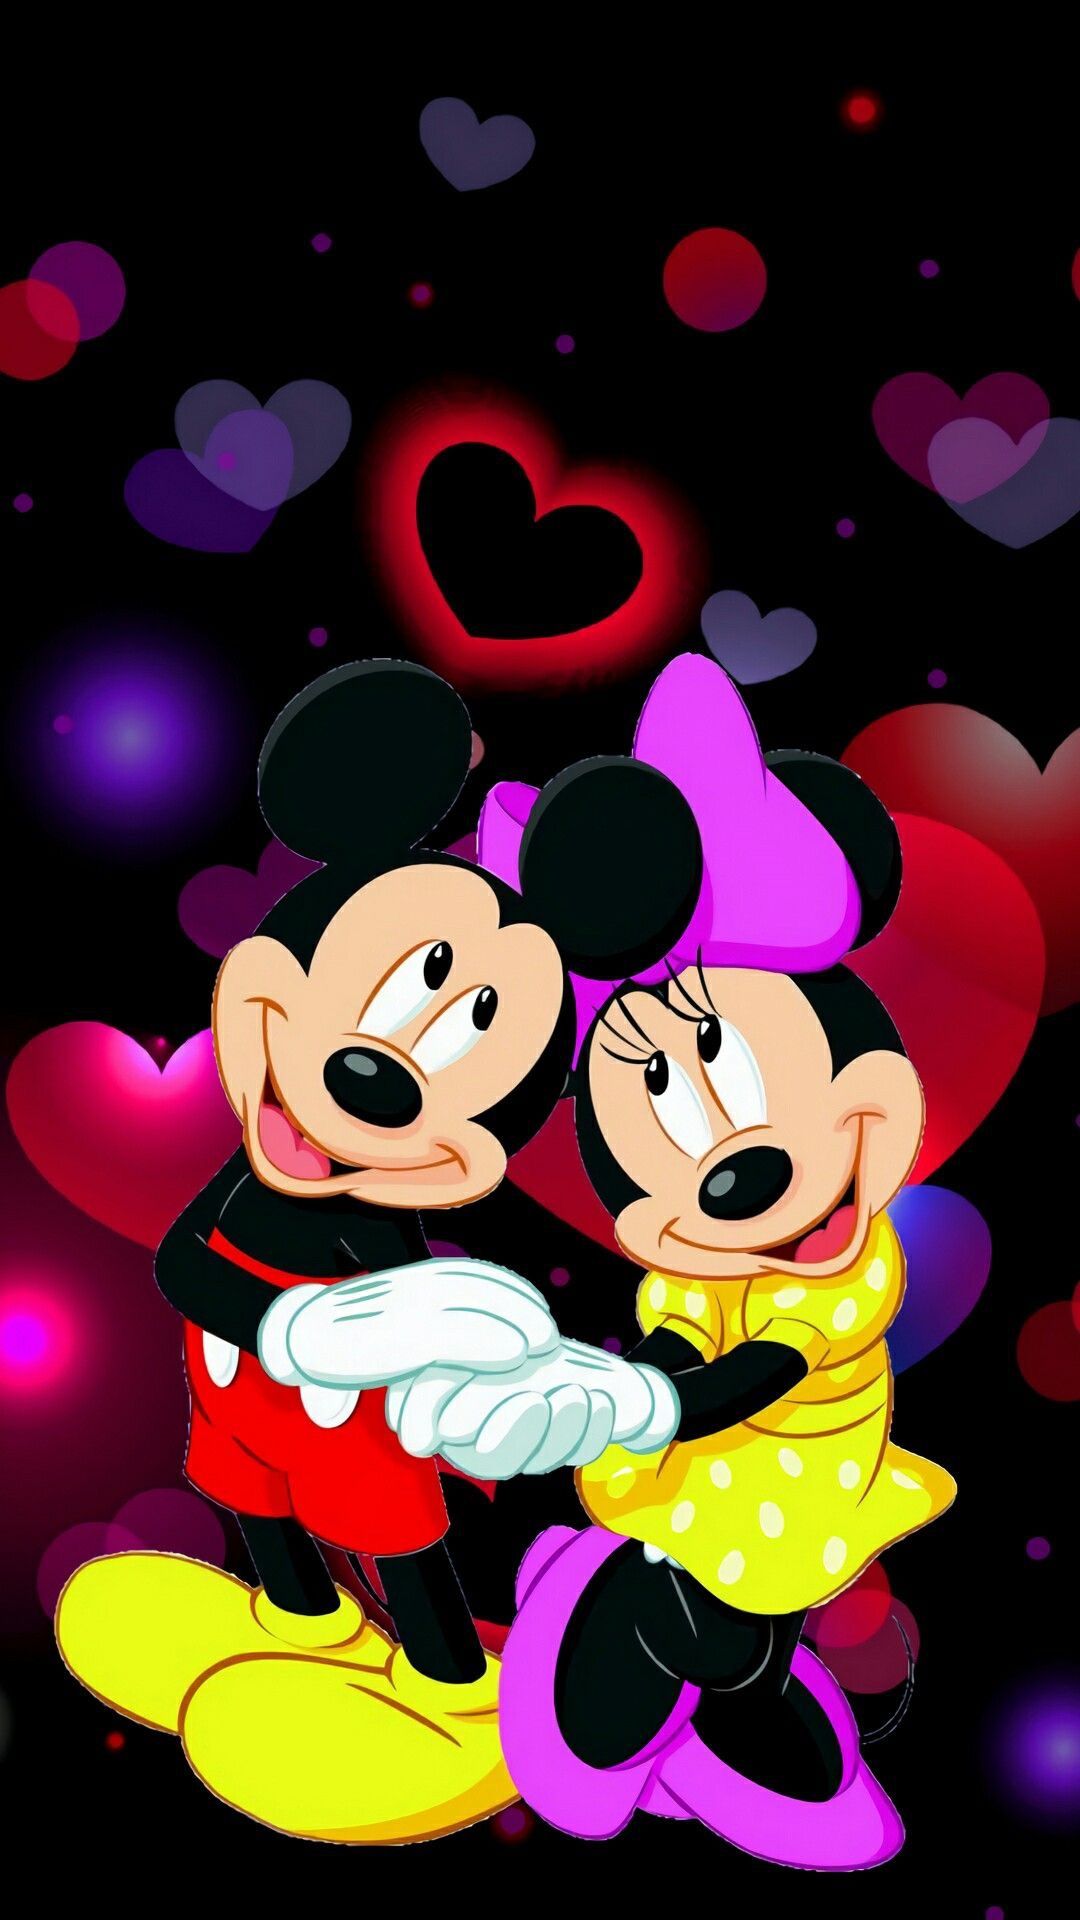 1080x1920 Samsung Wallpaper. Mickey mouse wallpaper, Mickey mouse, Cute on WallpaperBat